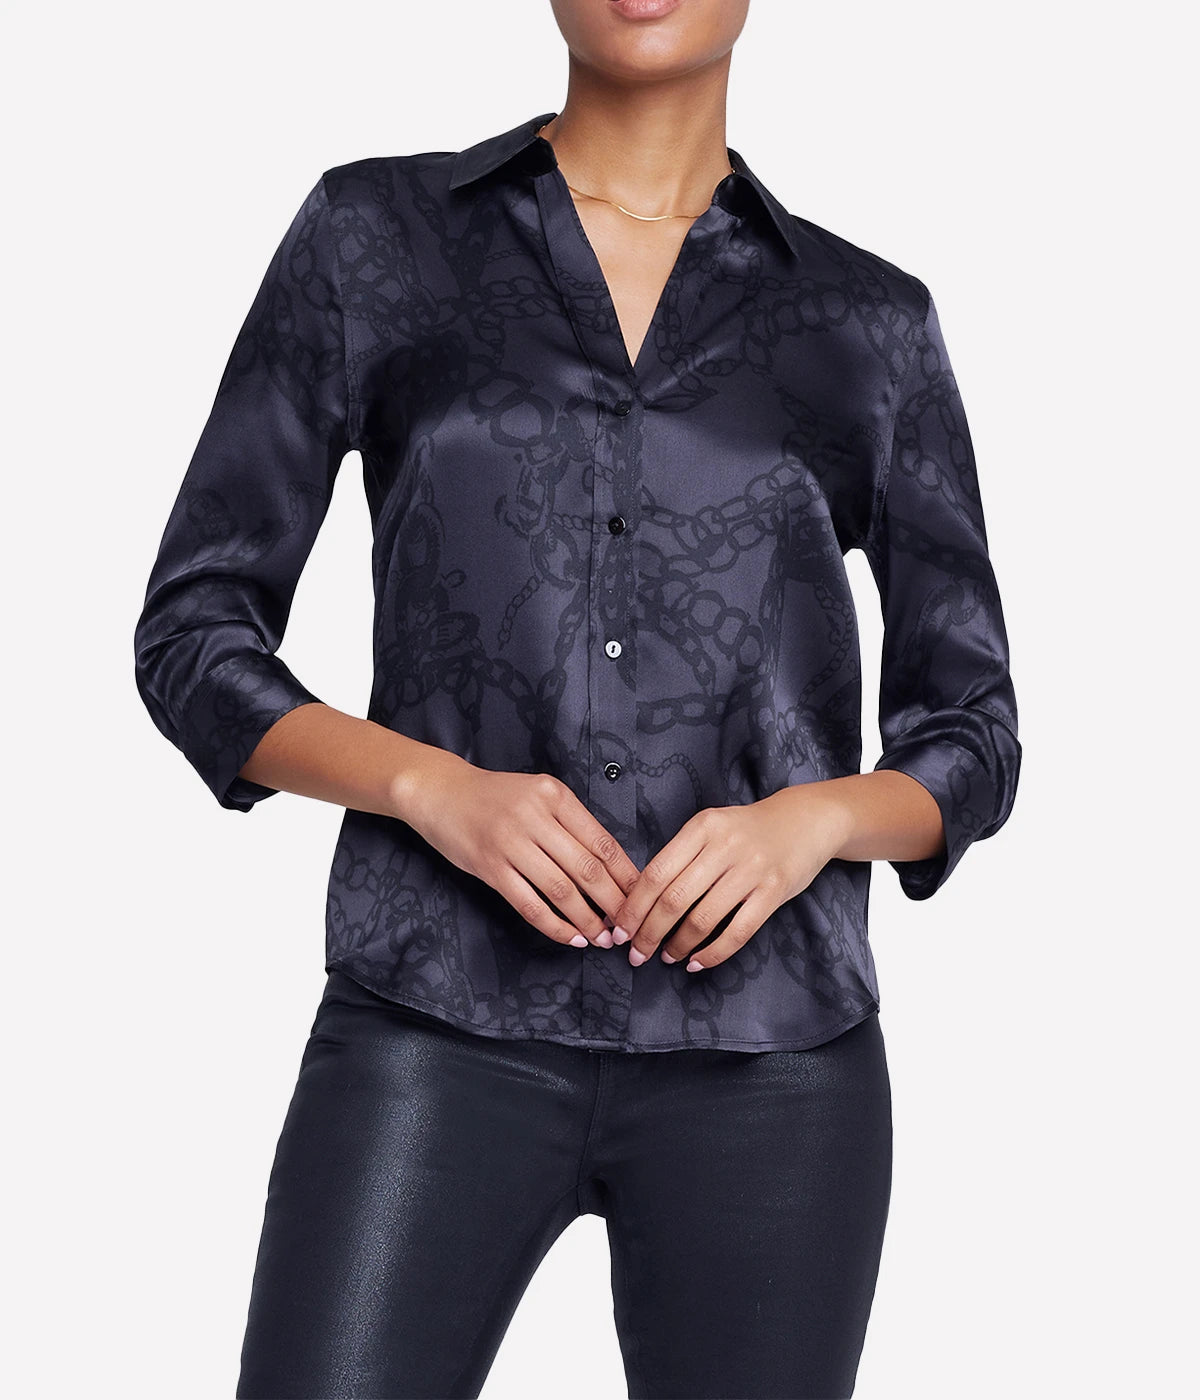 Dani 3/4 Sleeve Blouse in Black All Over Chain